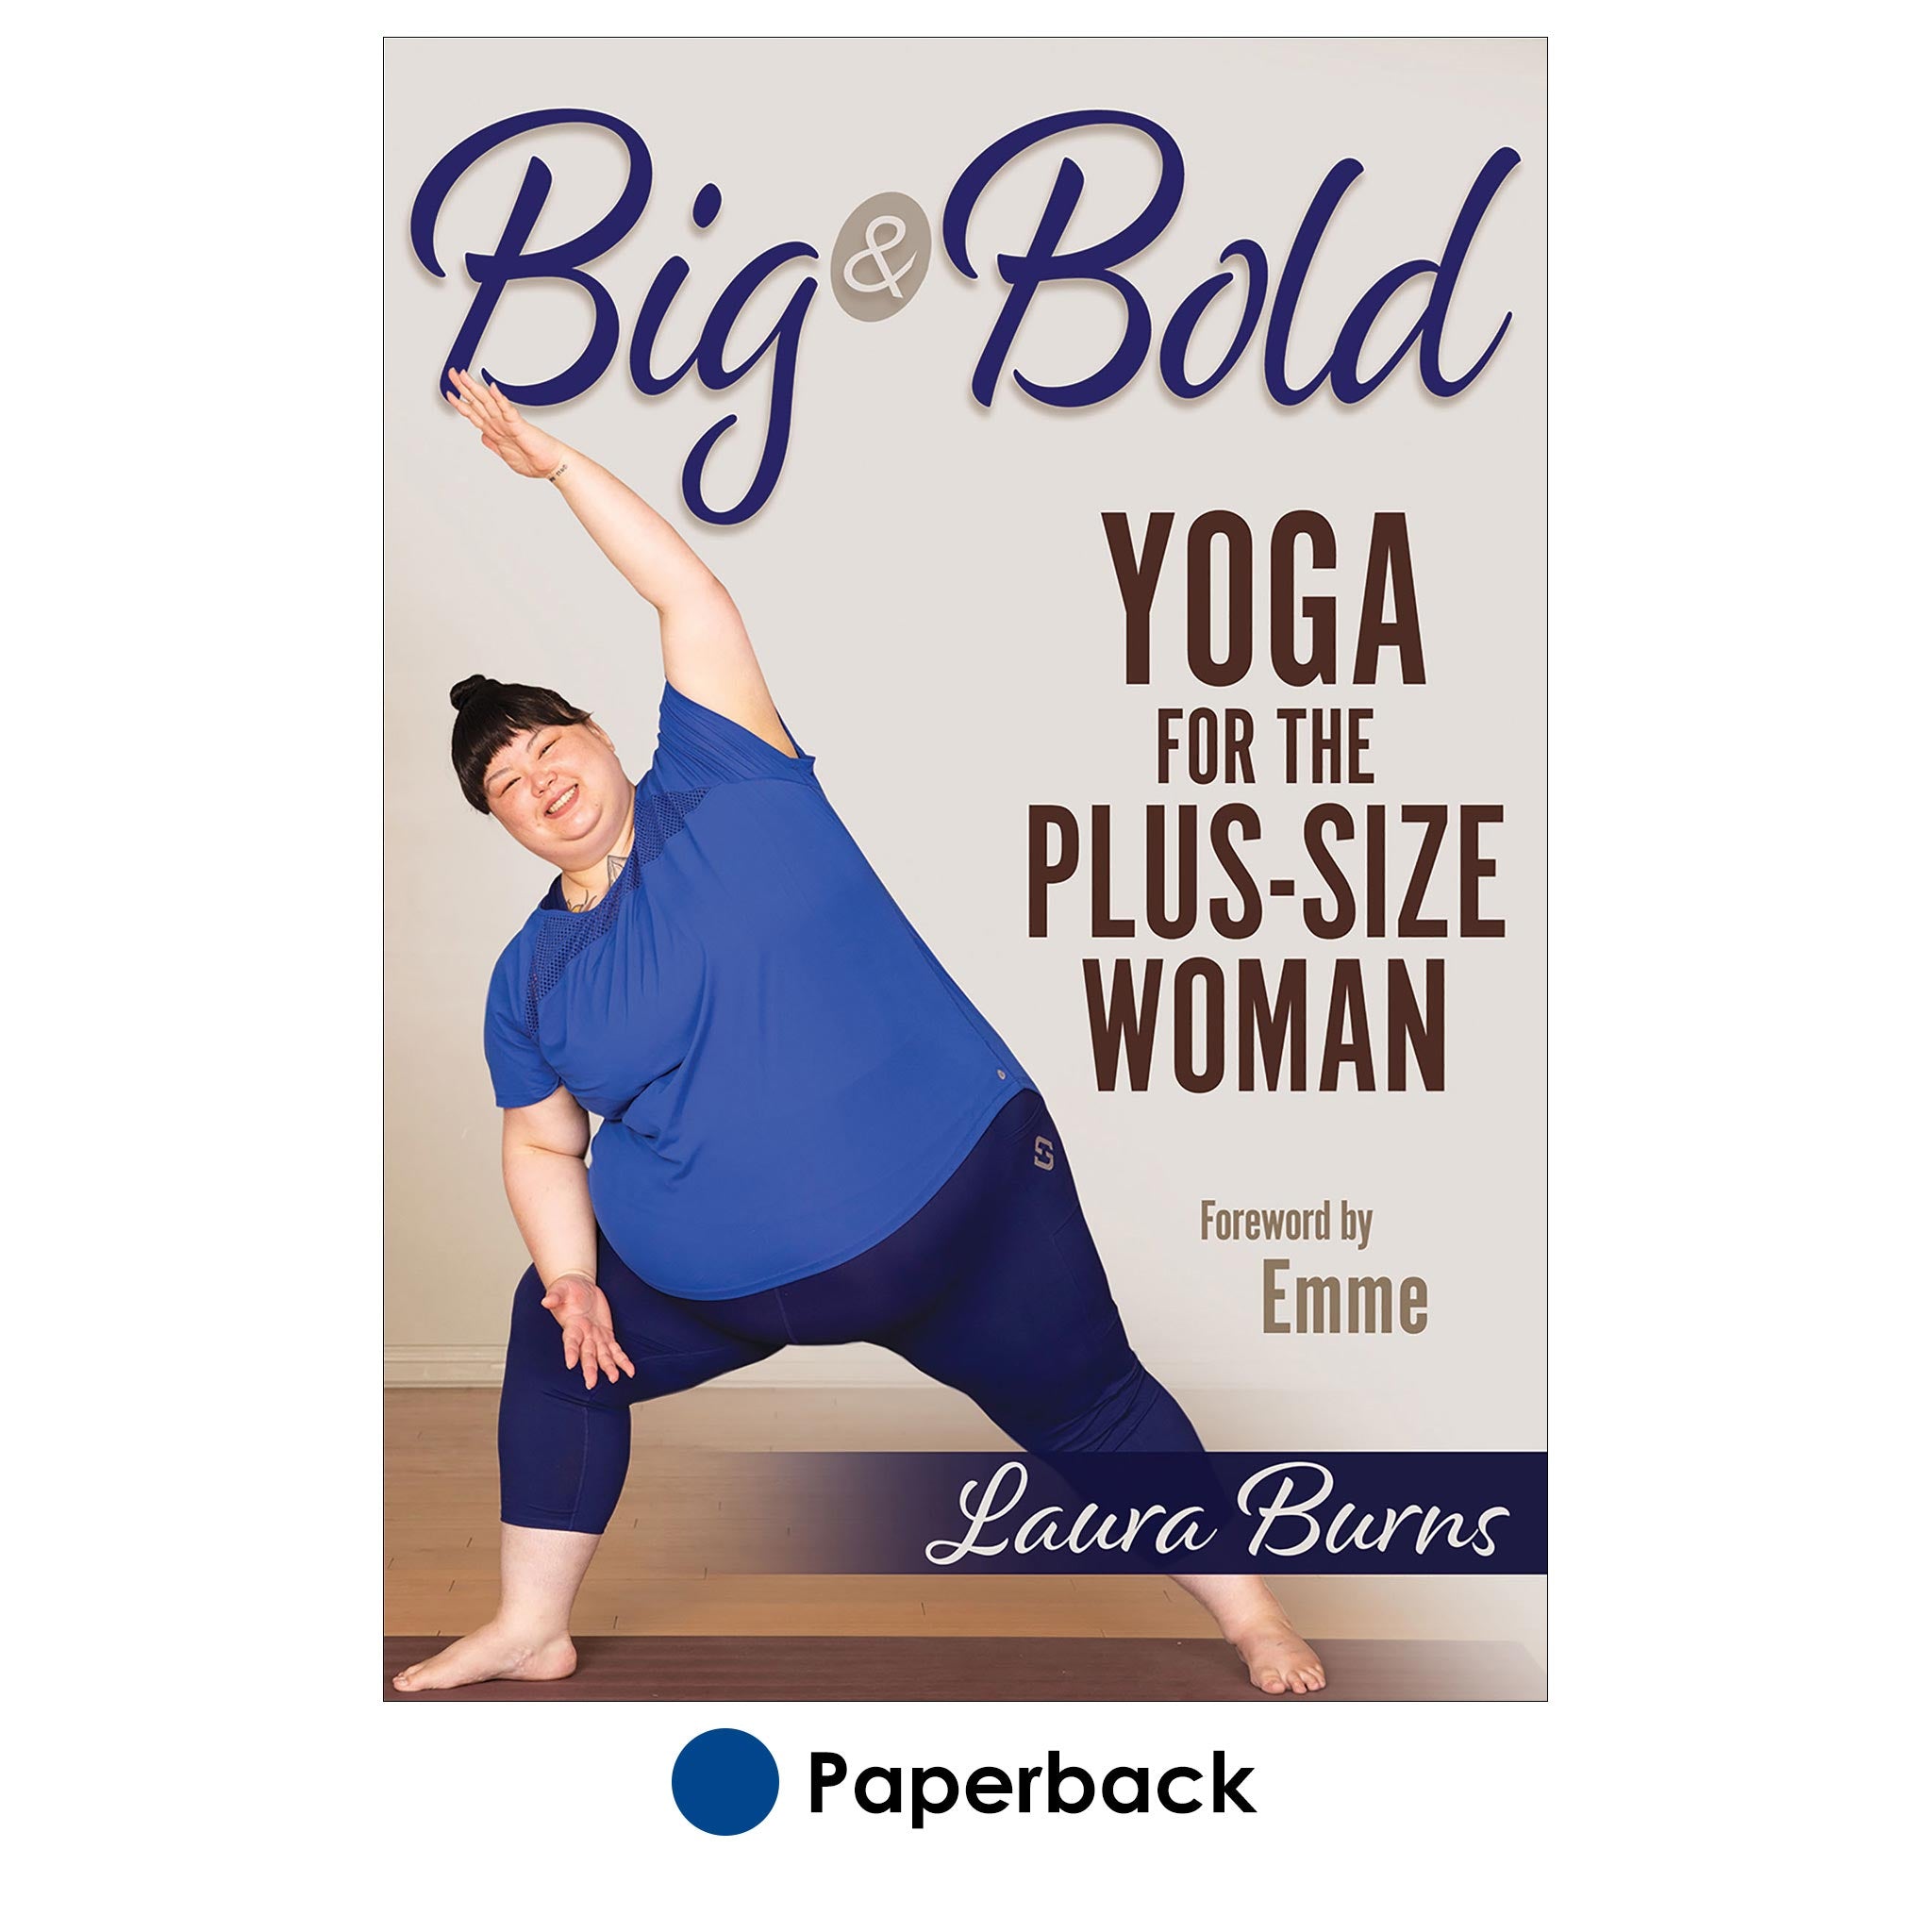 Plus size abstract woman workout in yoga poses. Bodypositive lady